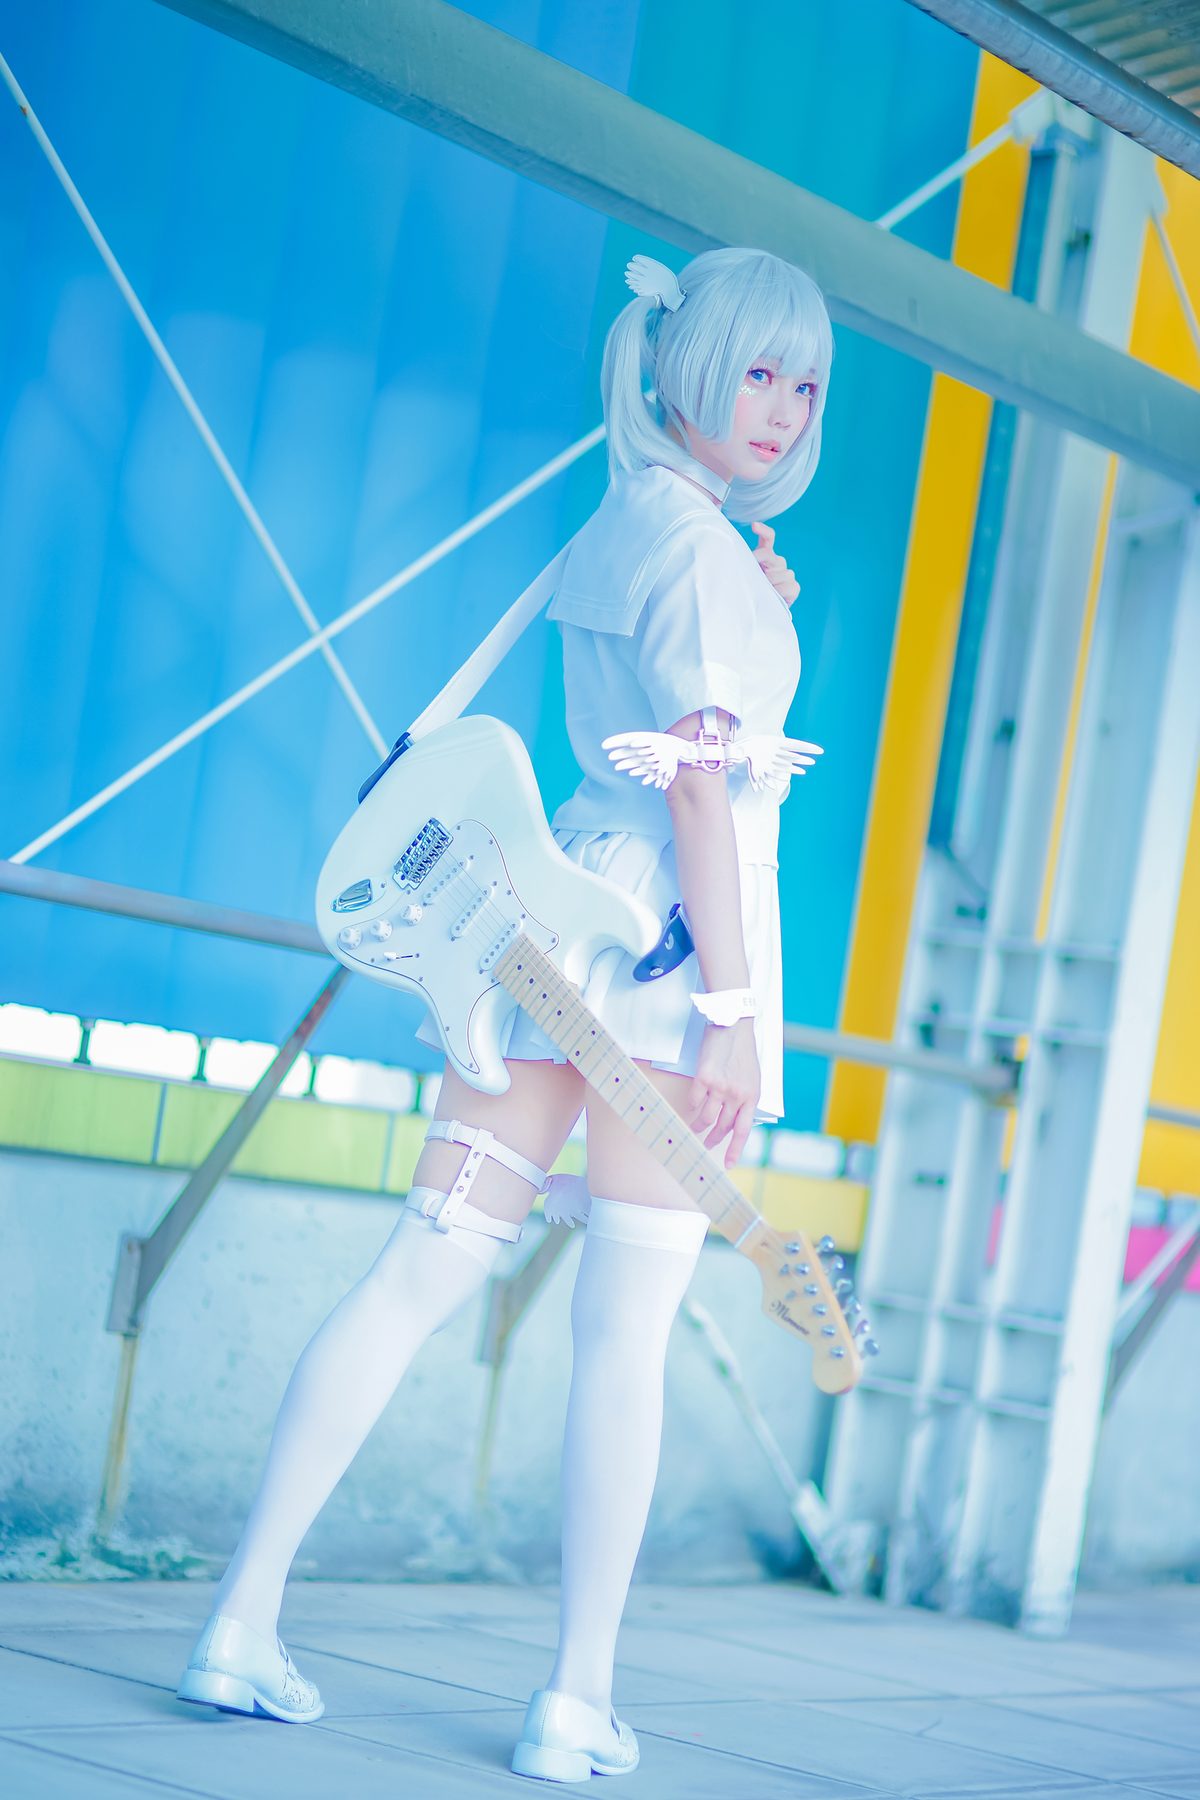 View - Coser@Ely_eee ElyEE子 - TUESDAY TWINTAIL A - 